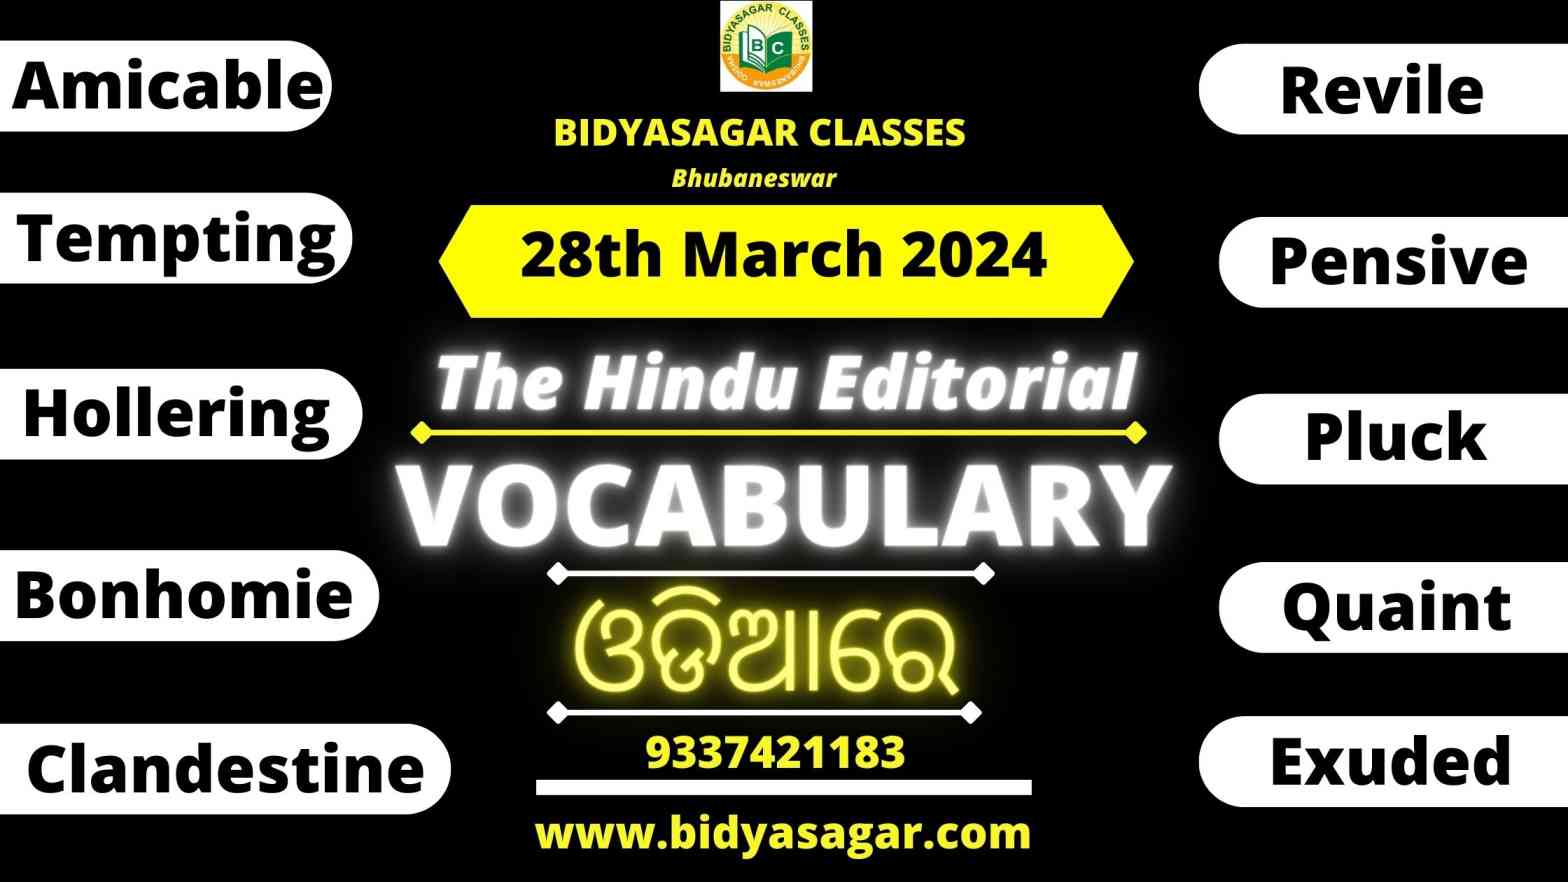 The Hindu Editorial Vocabulary of 28th March 2024